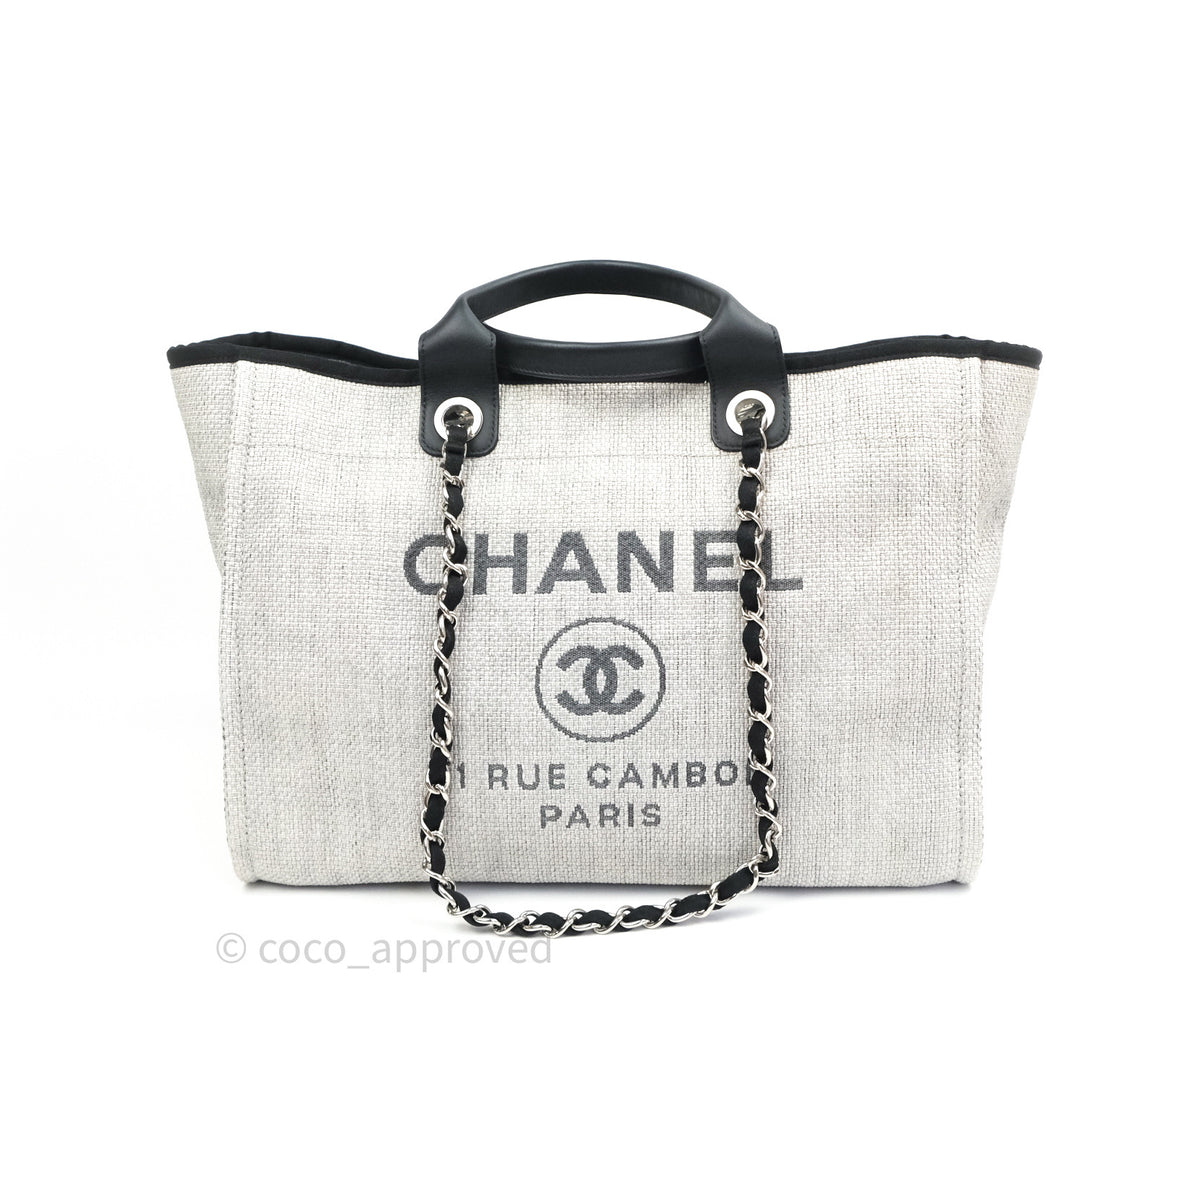 CHANEL Canvas Extra Large Deauville Tote Grey 1284337